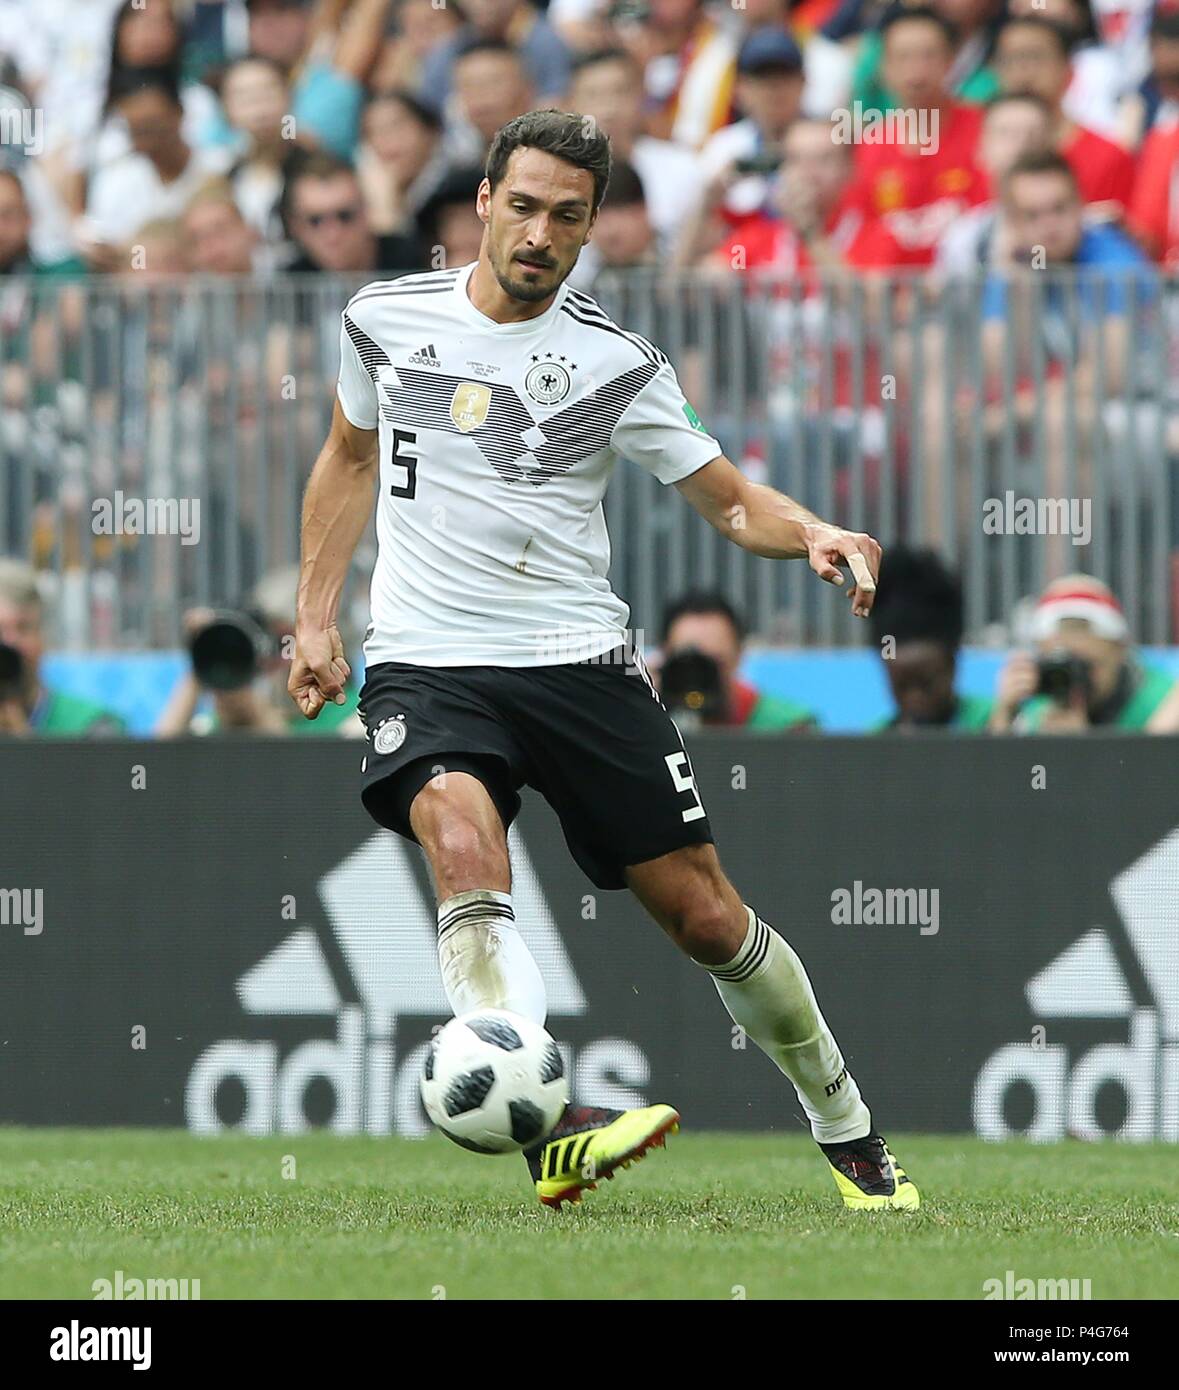 firo: 17.06.2018, Moscow, Fuvuball, Soccer, National Team, World Cup 2018 in Russia, Ruvuland, WC 2018 in Russia, Ruvuland, World Cup 2018 Russia, Russia, M11, Germany - Mexico 0: 1 GER Mats Hummels, single action | usage worldwide Stock Photo